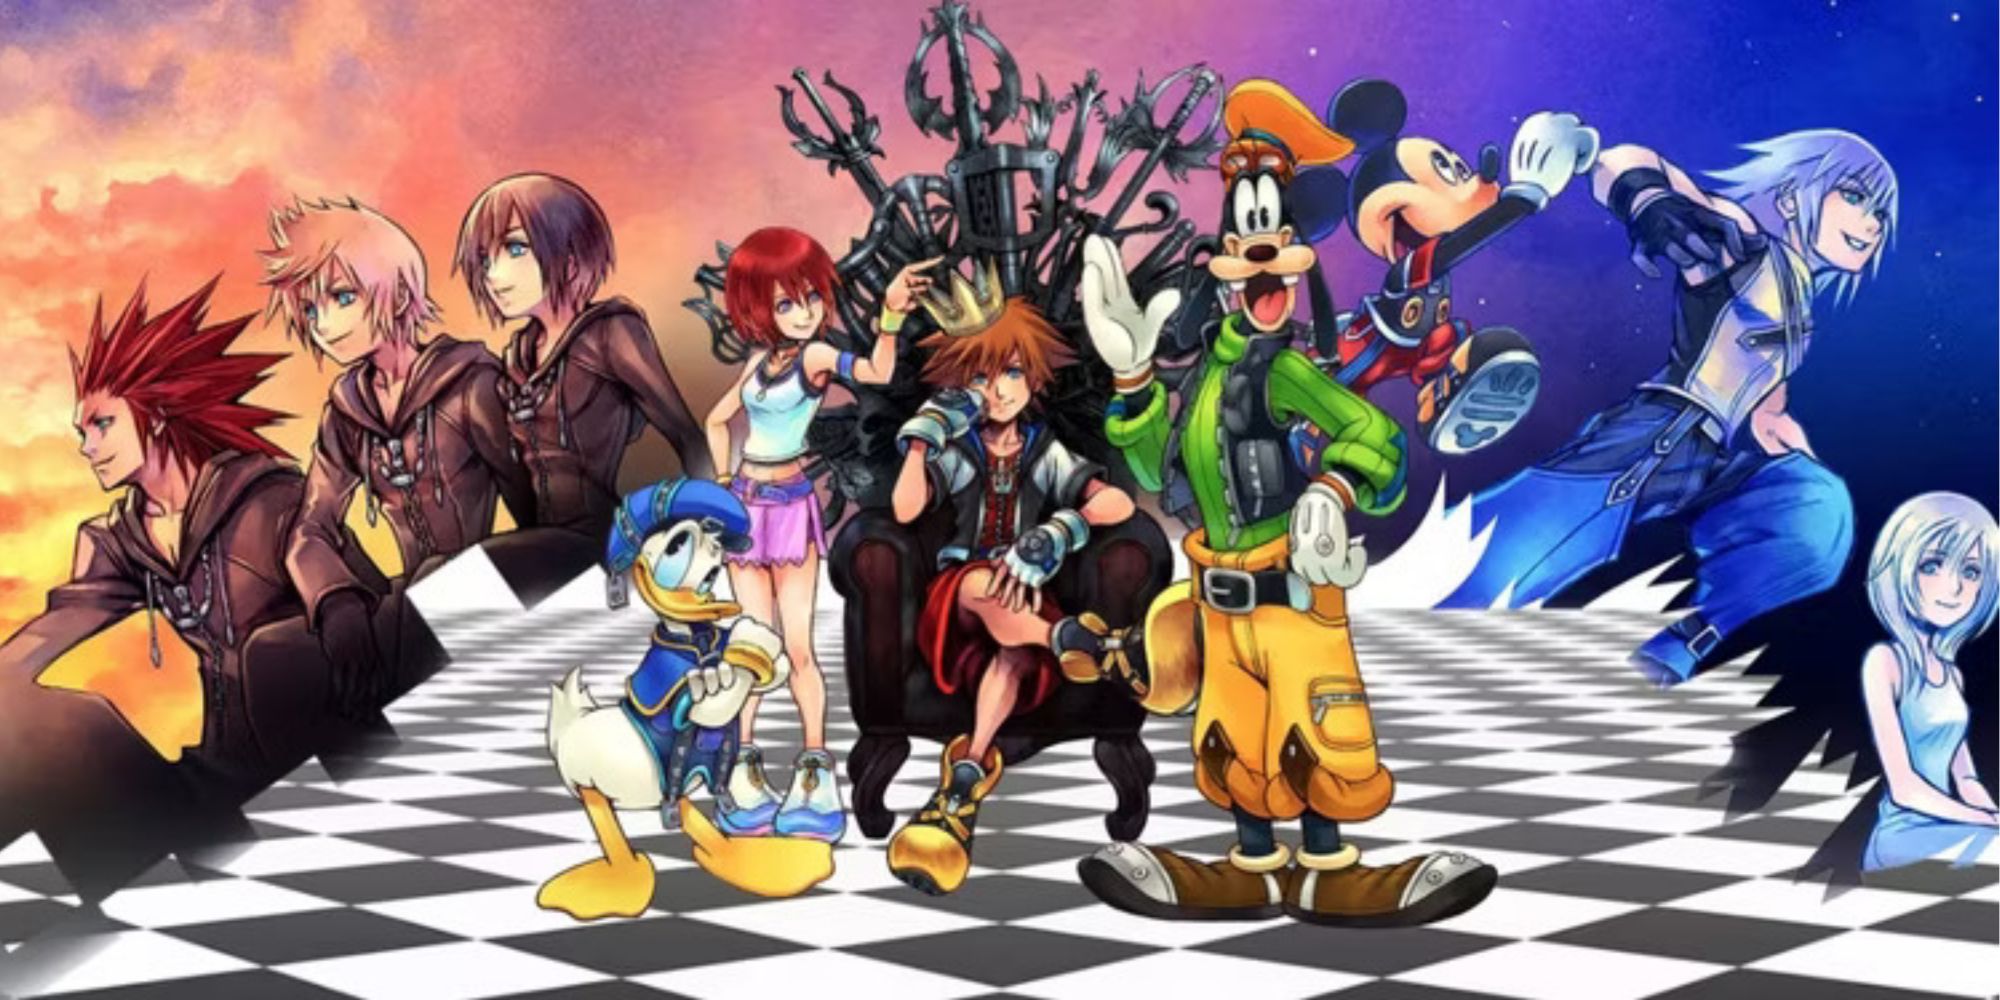 Artwork showing the main cast of Kingdom Hearts including Donald, Goofy and Mickey Mouse alongside series protagonist Sora who's sitting on a crown of weapons with a crown on his head in a smug manner.